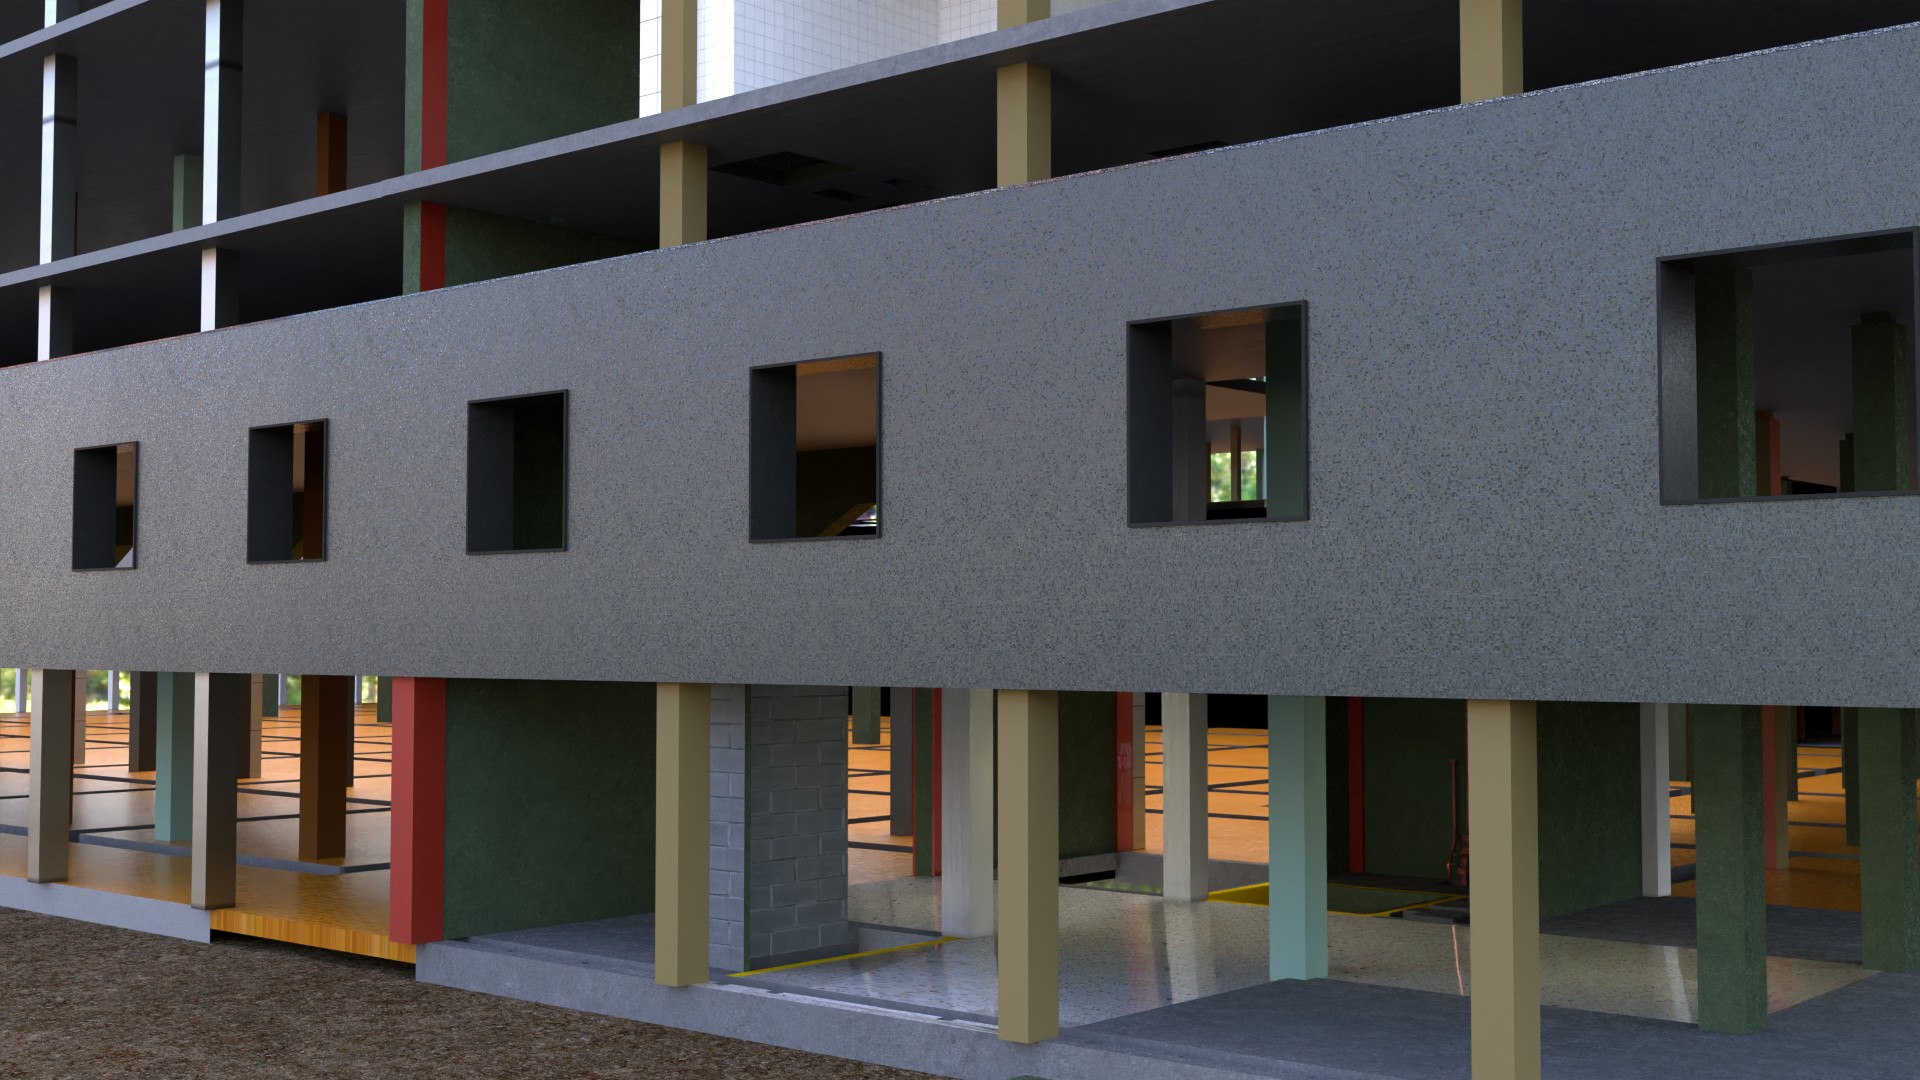 OSHQ model - new and modelled from scratch, the 1st floor façade with its distinctive inset windows.